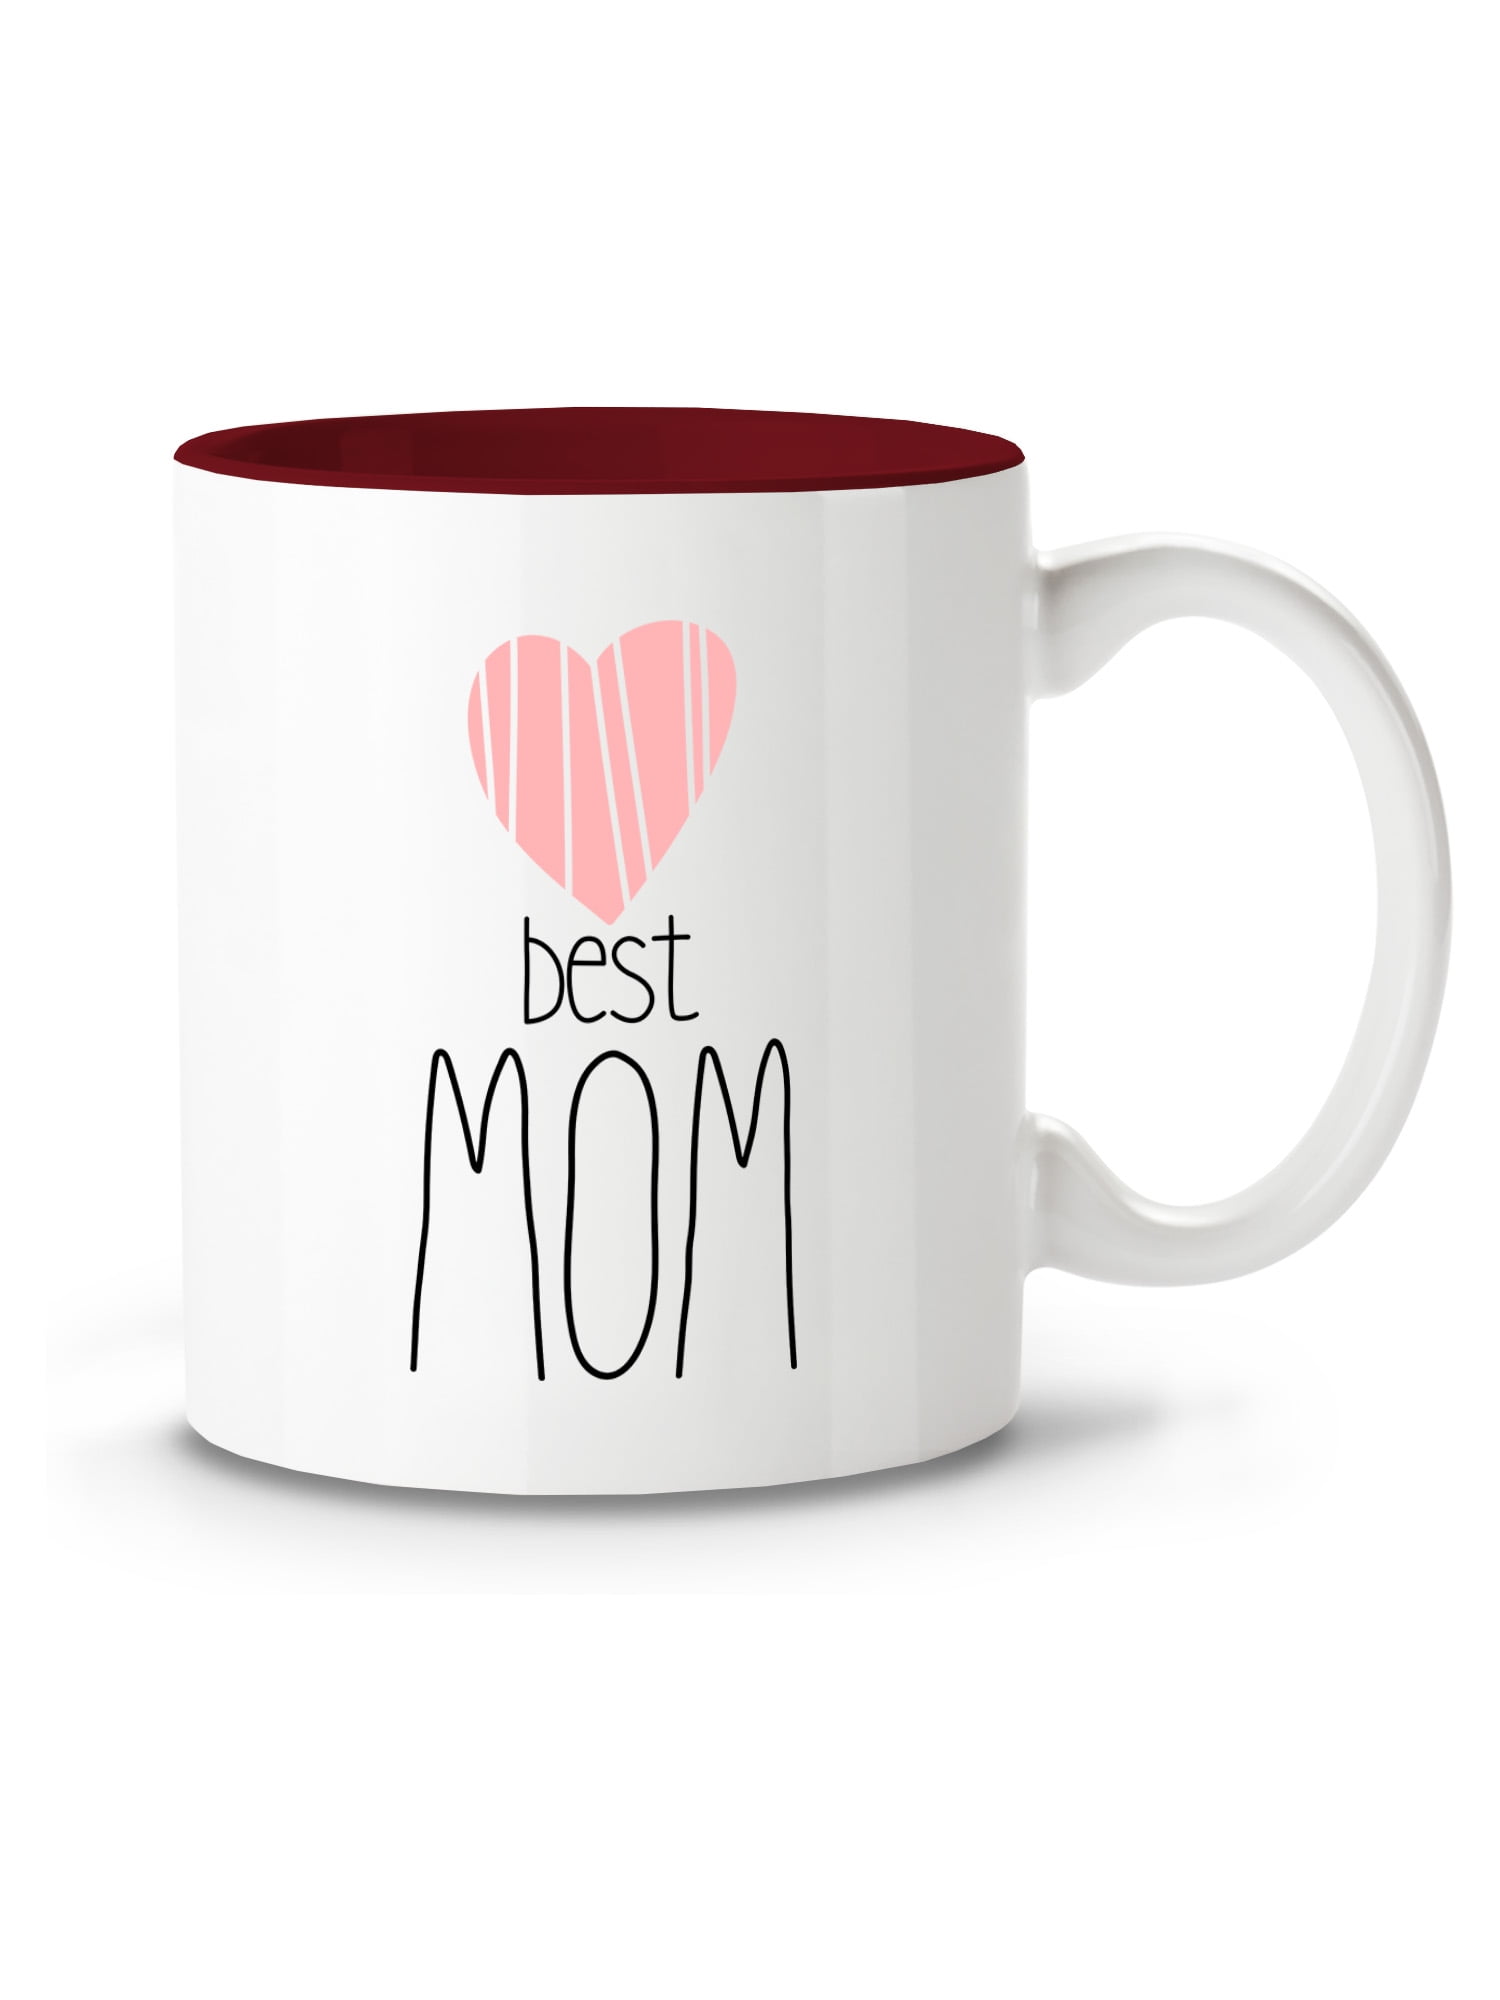 Mama Mommy Mom Bruh Iced Coffee Cup for Mothers - Great Gift for Her on Mothers Day, Birthdays, Christmas - 16oz Glass Cup Tumbler from BluChi